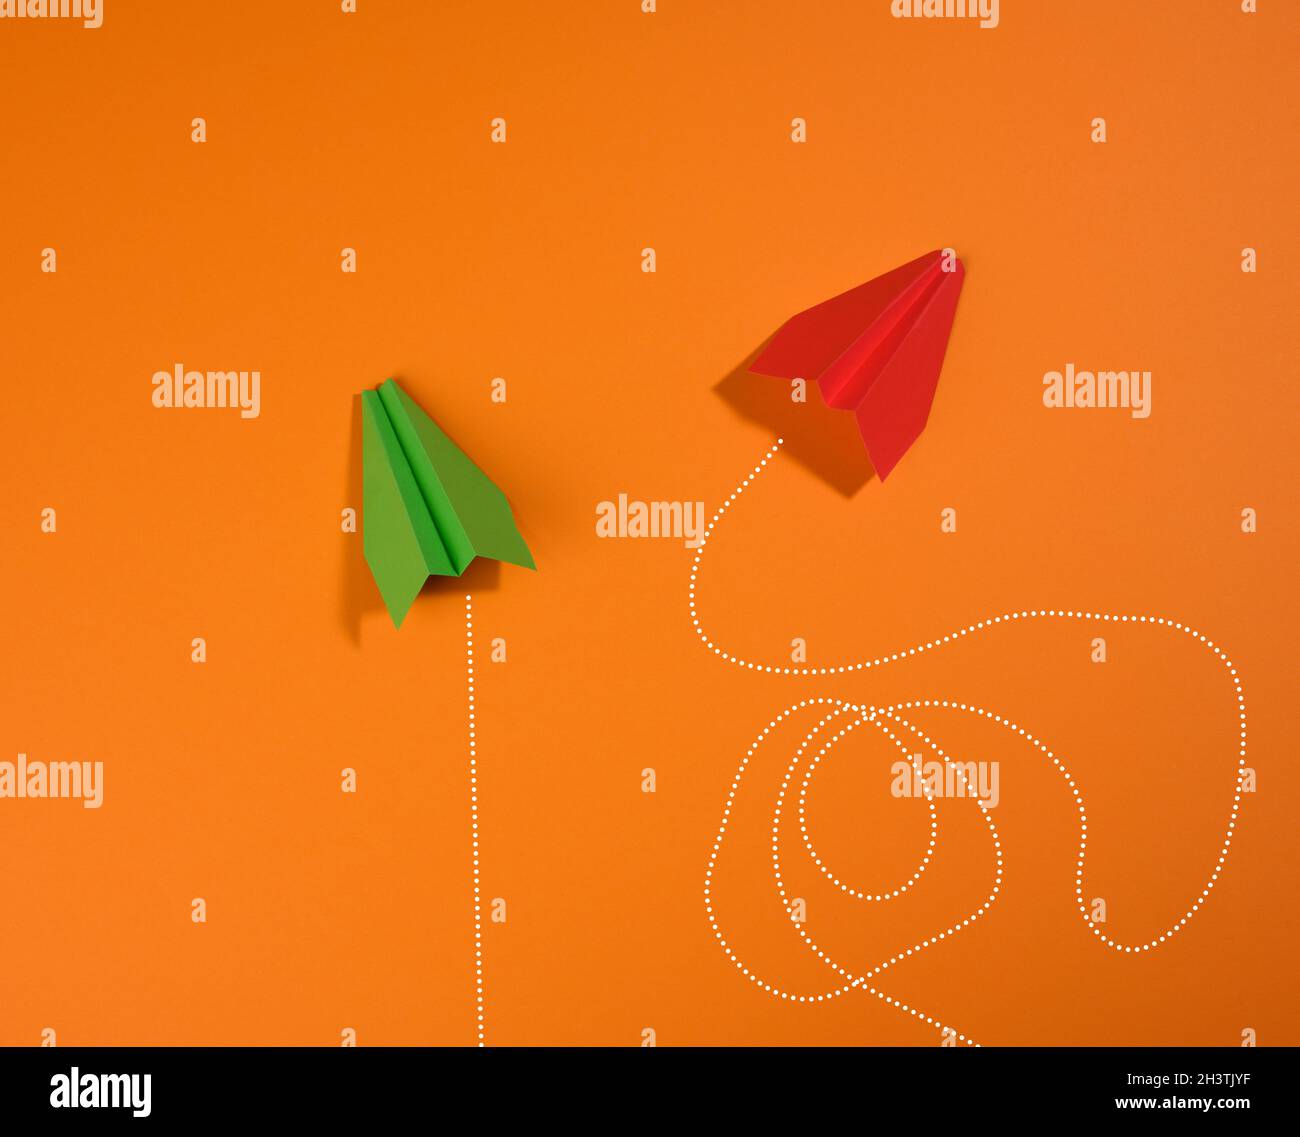 Two paper airplanes with different trajectory of movement on an orange background Stock Photo